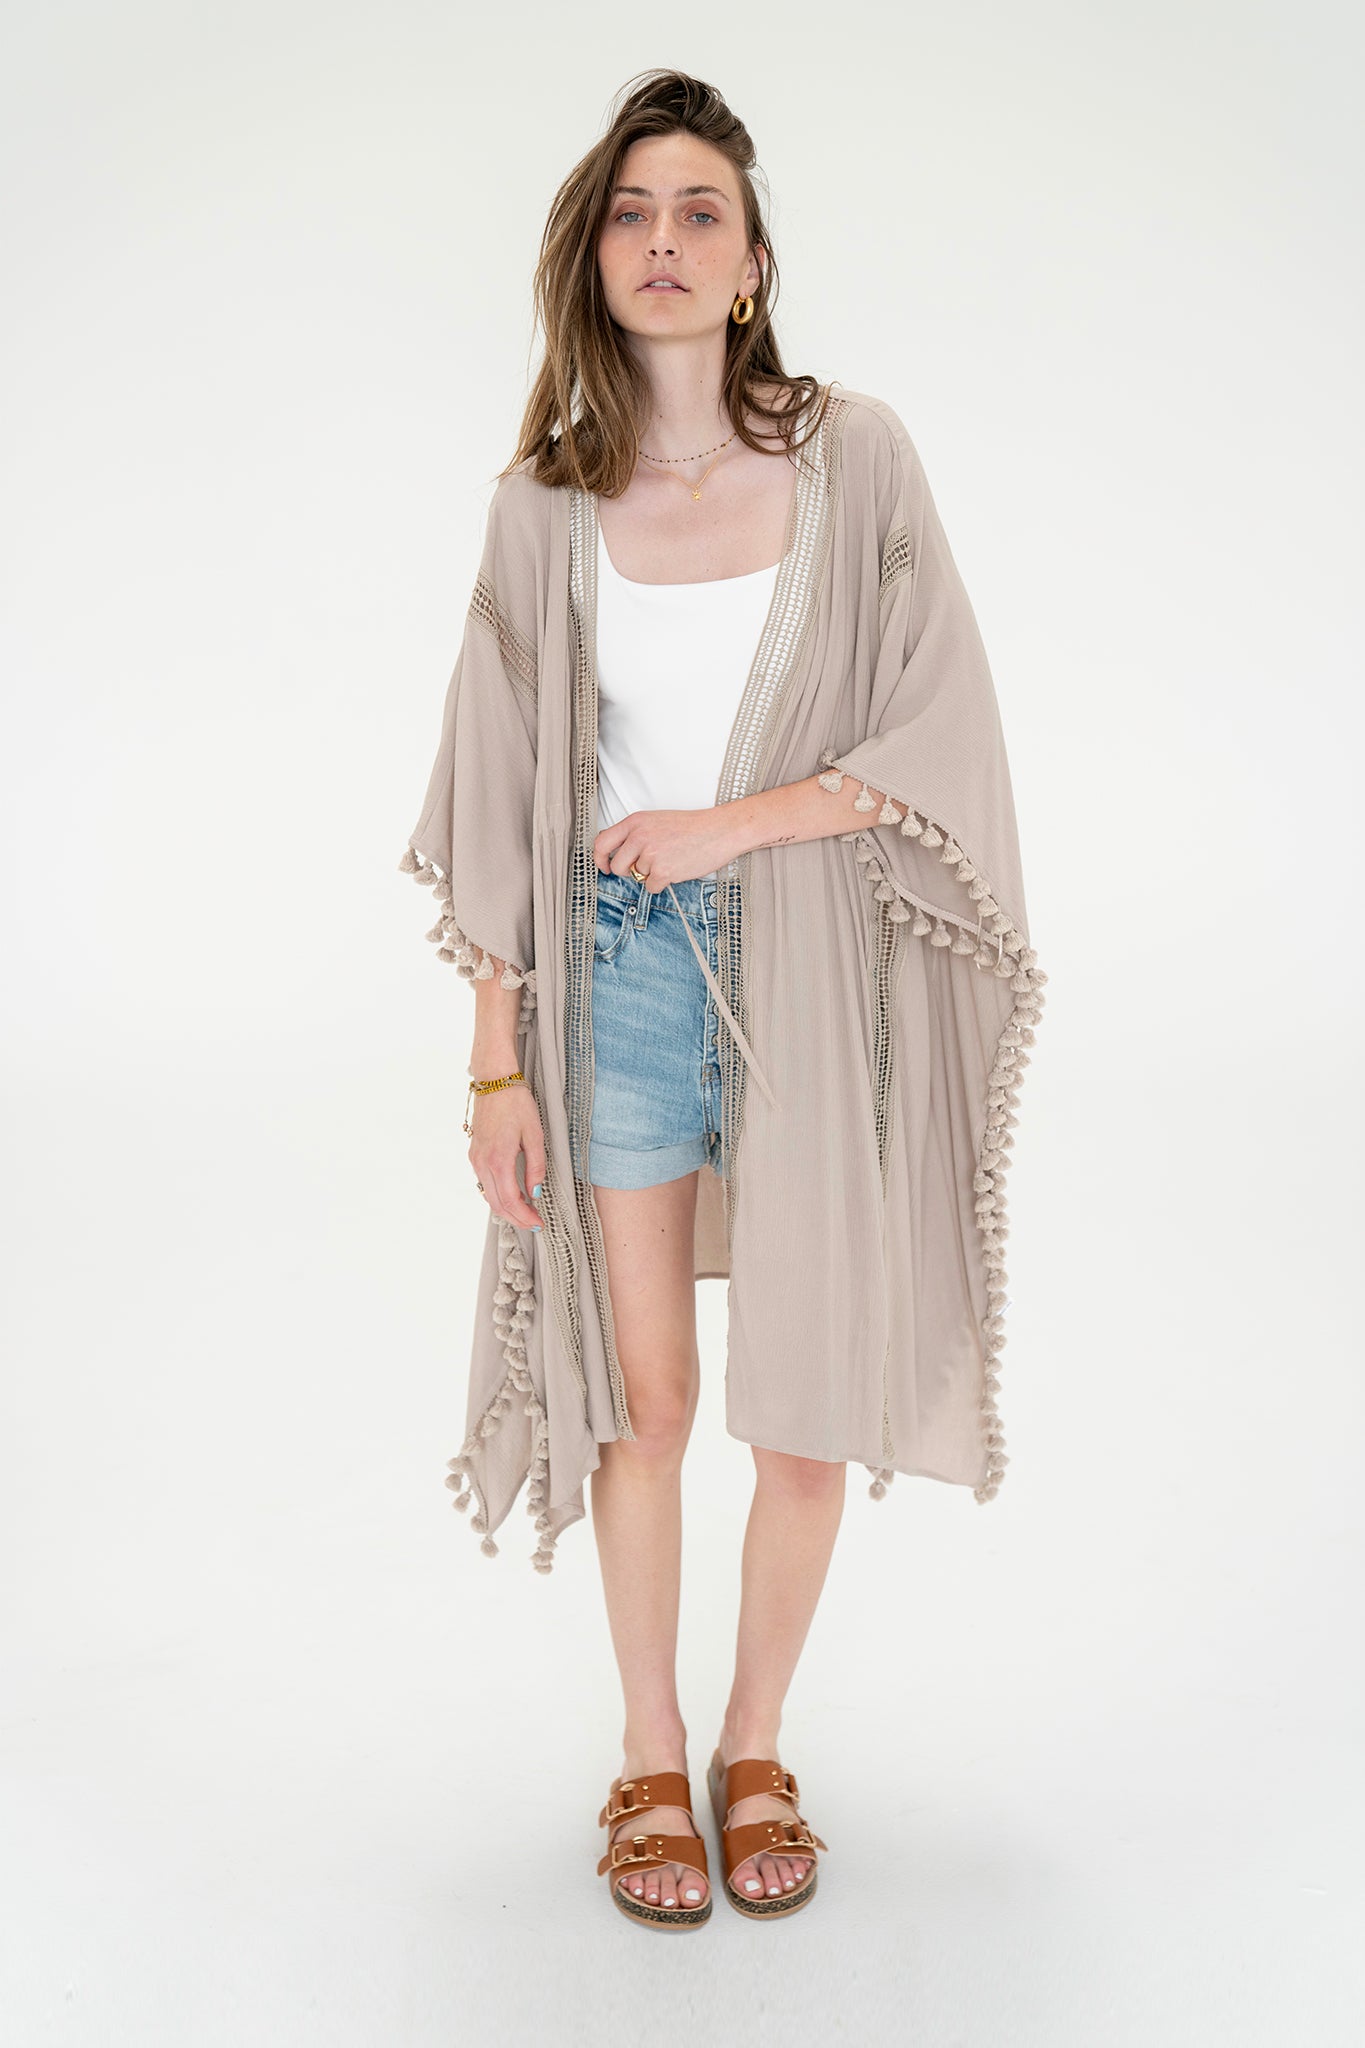 View 2 of Capistrano Tassel Fringe Duster, a Duster from Larrea Cove. Detail: .